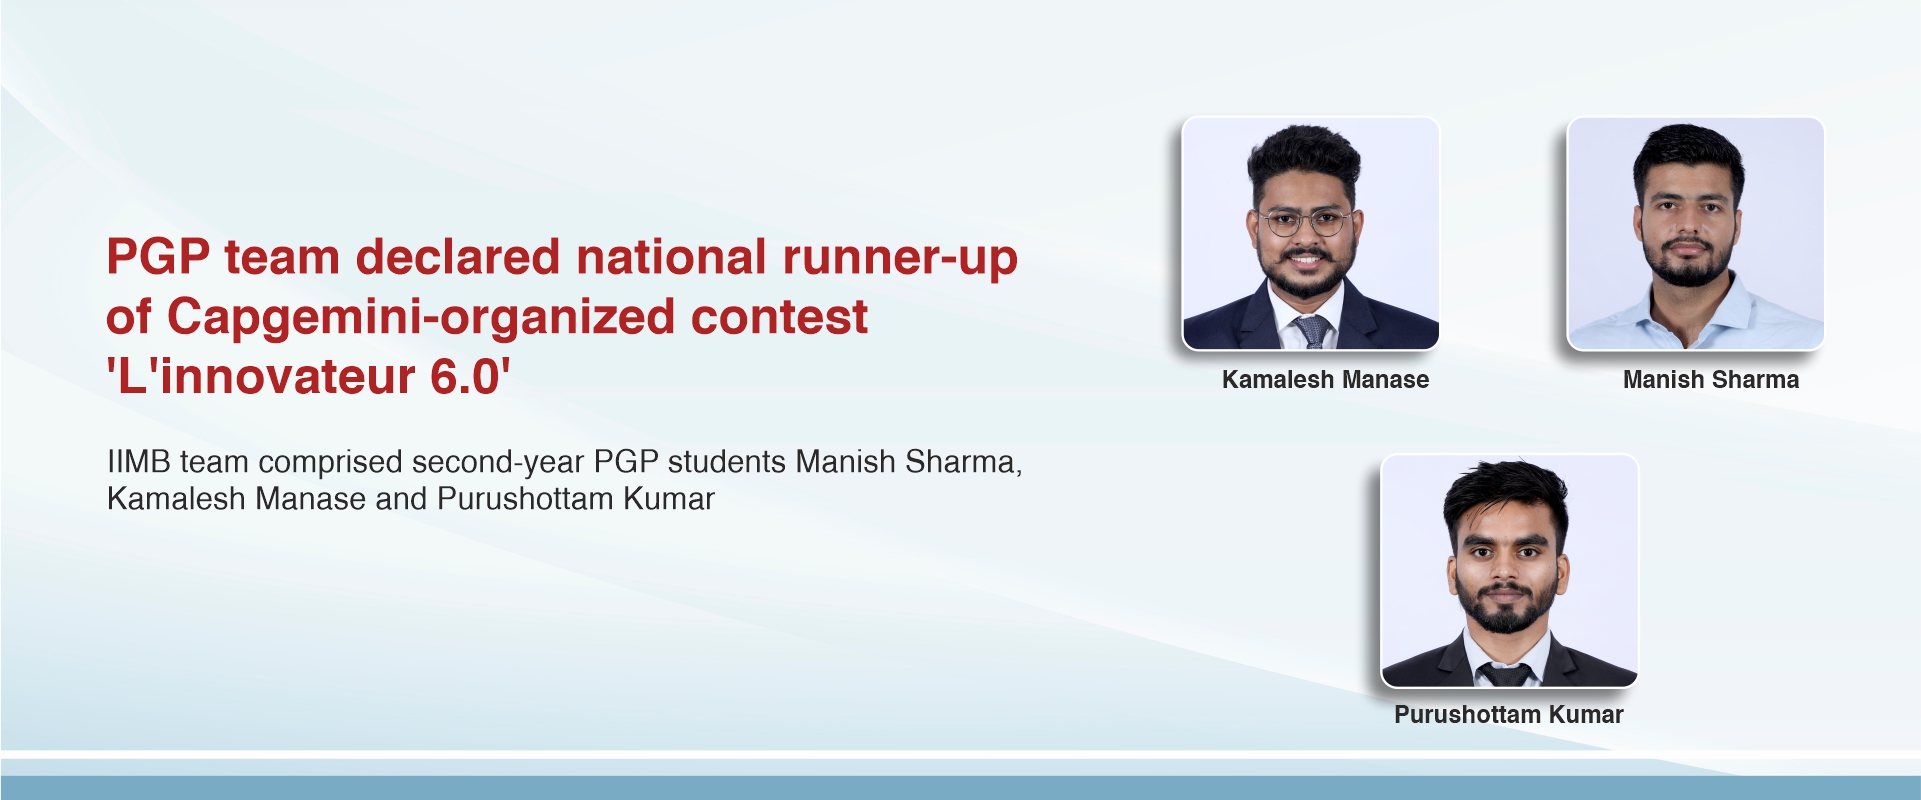 PGP team declared national runner-up of Capgemini-organized contest ‘L'innovateur 6.0’